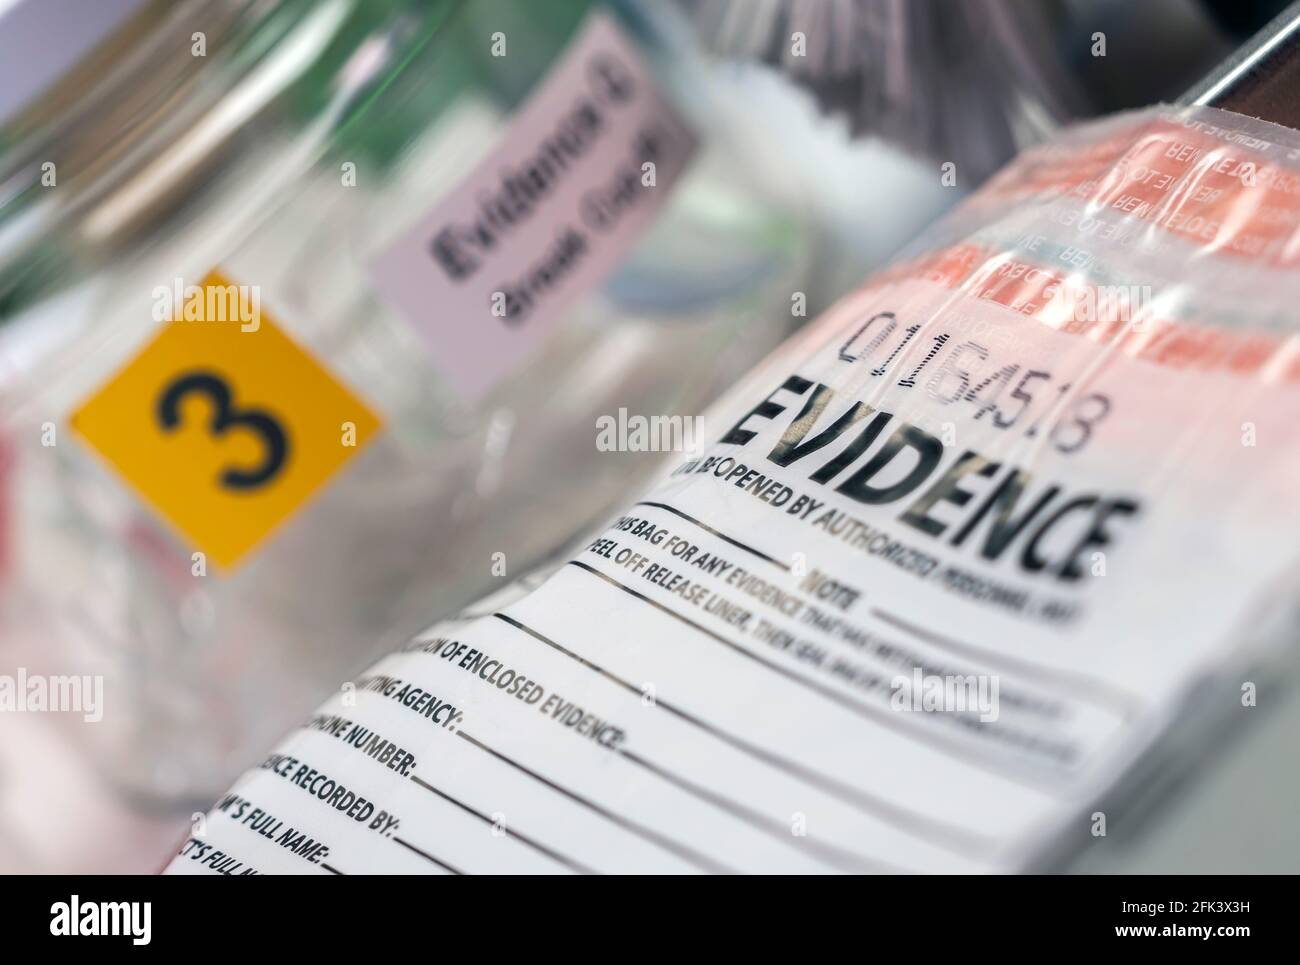 Detail of DNA sampling tubes in Laboratorio forensic equipment, conceptual image Stock Photo